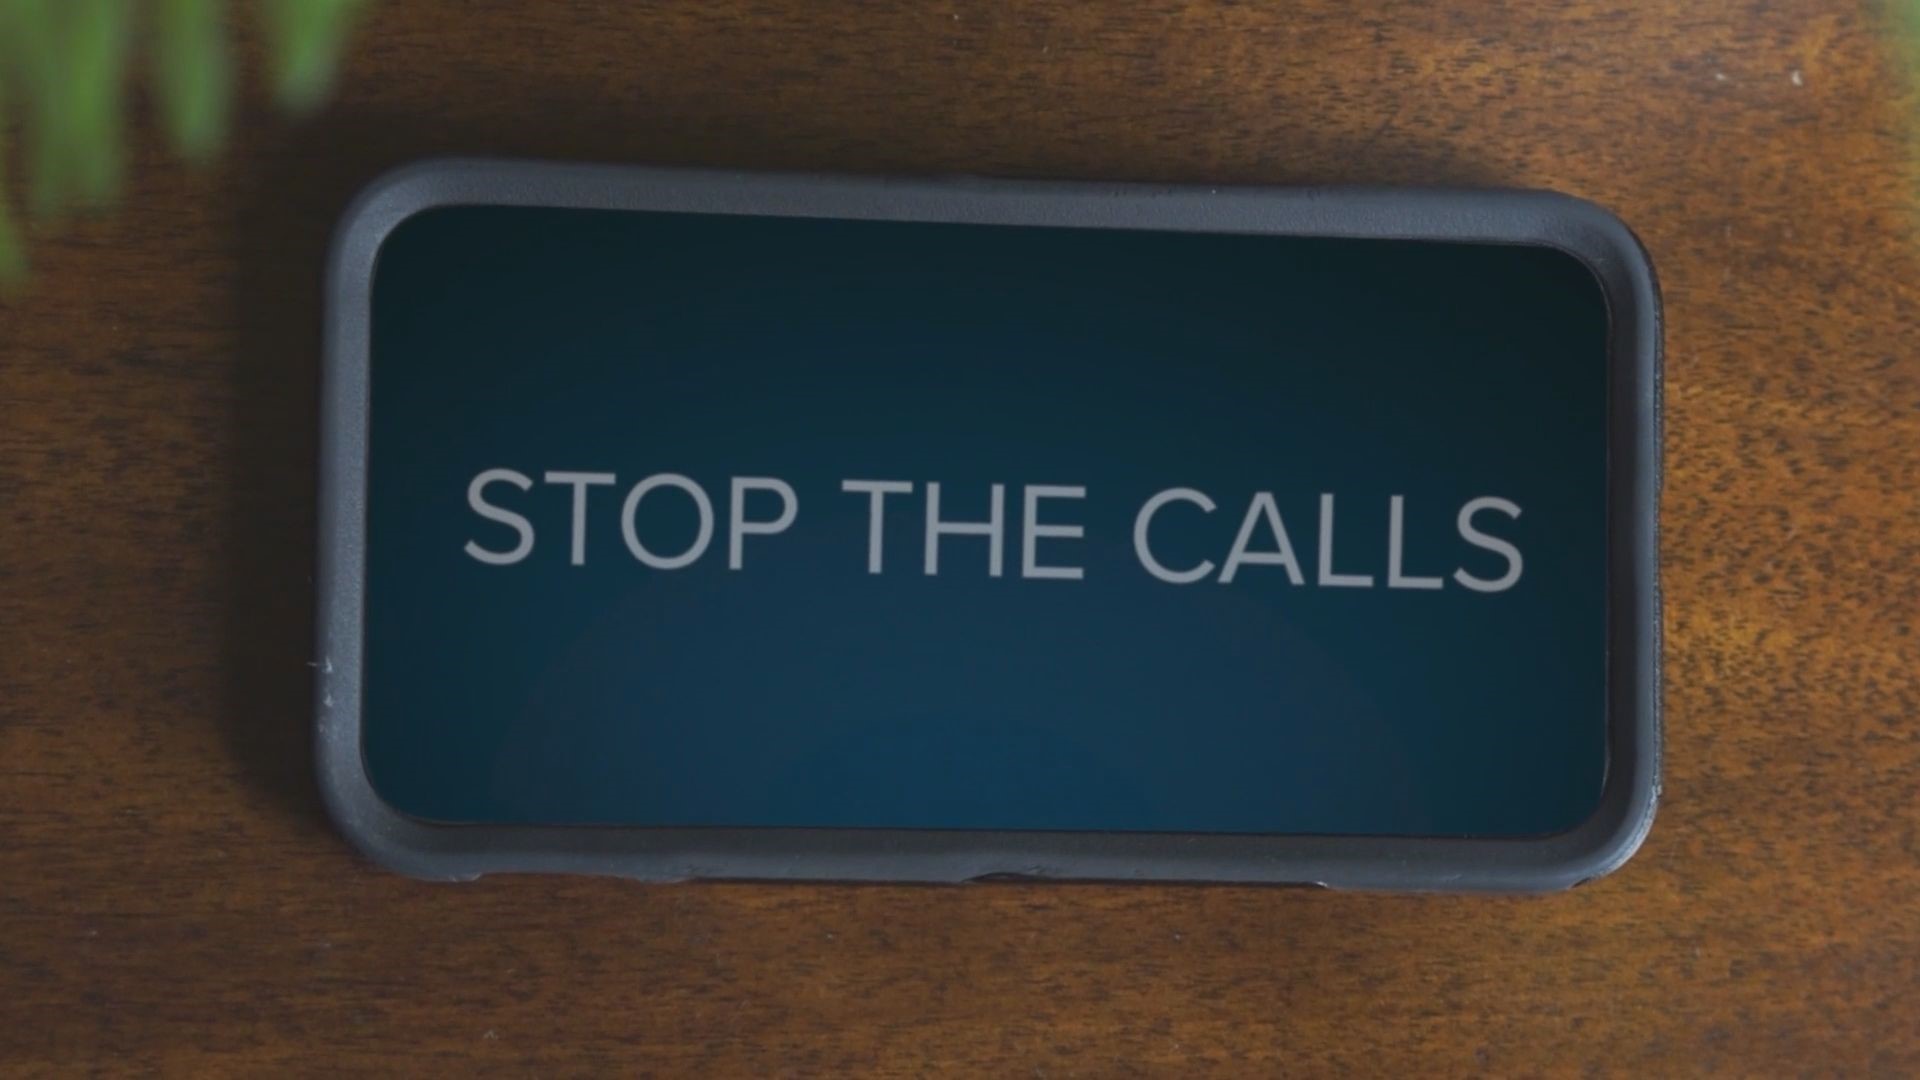 Cellphones may seem superpowered these days, but robocalls are still the kryptonite. Here are four tips on how to stop them from coming to your phone.